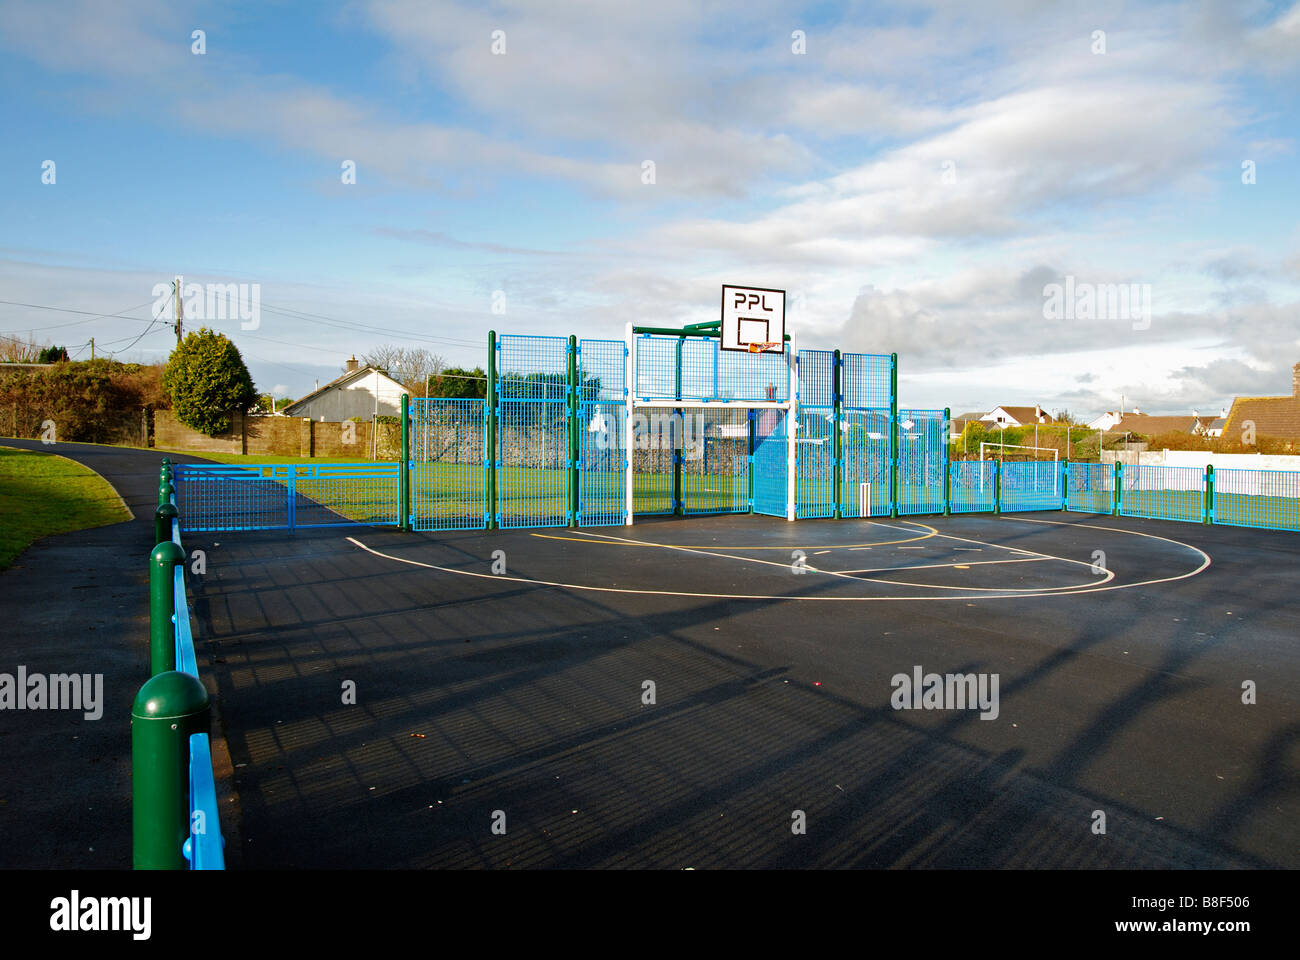 an outdoor all weather sports pitch in camborne,cornwall,uk Stock Photo